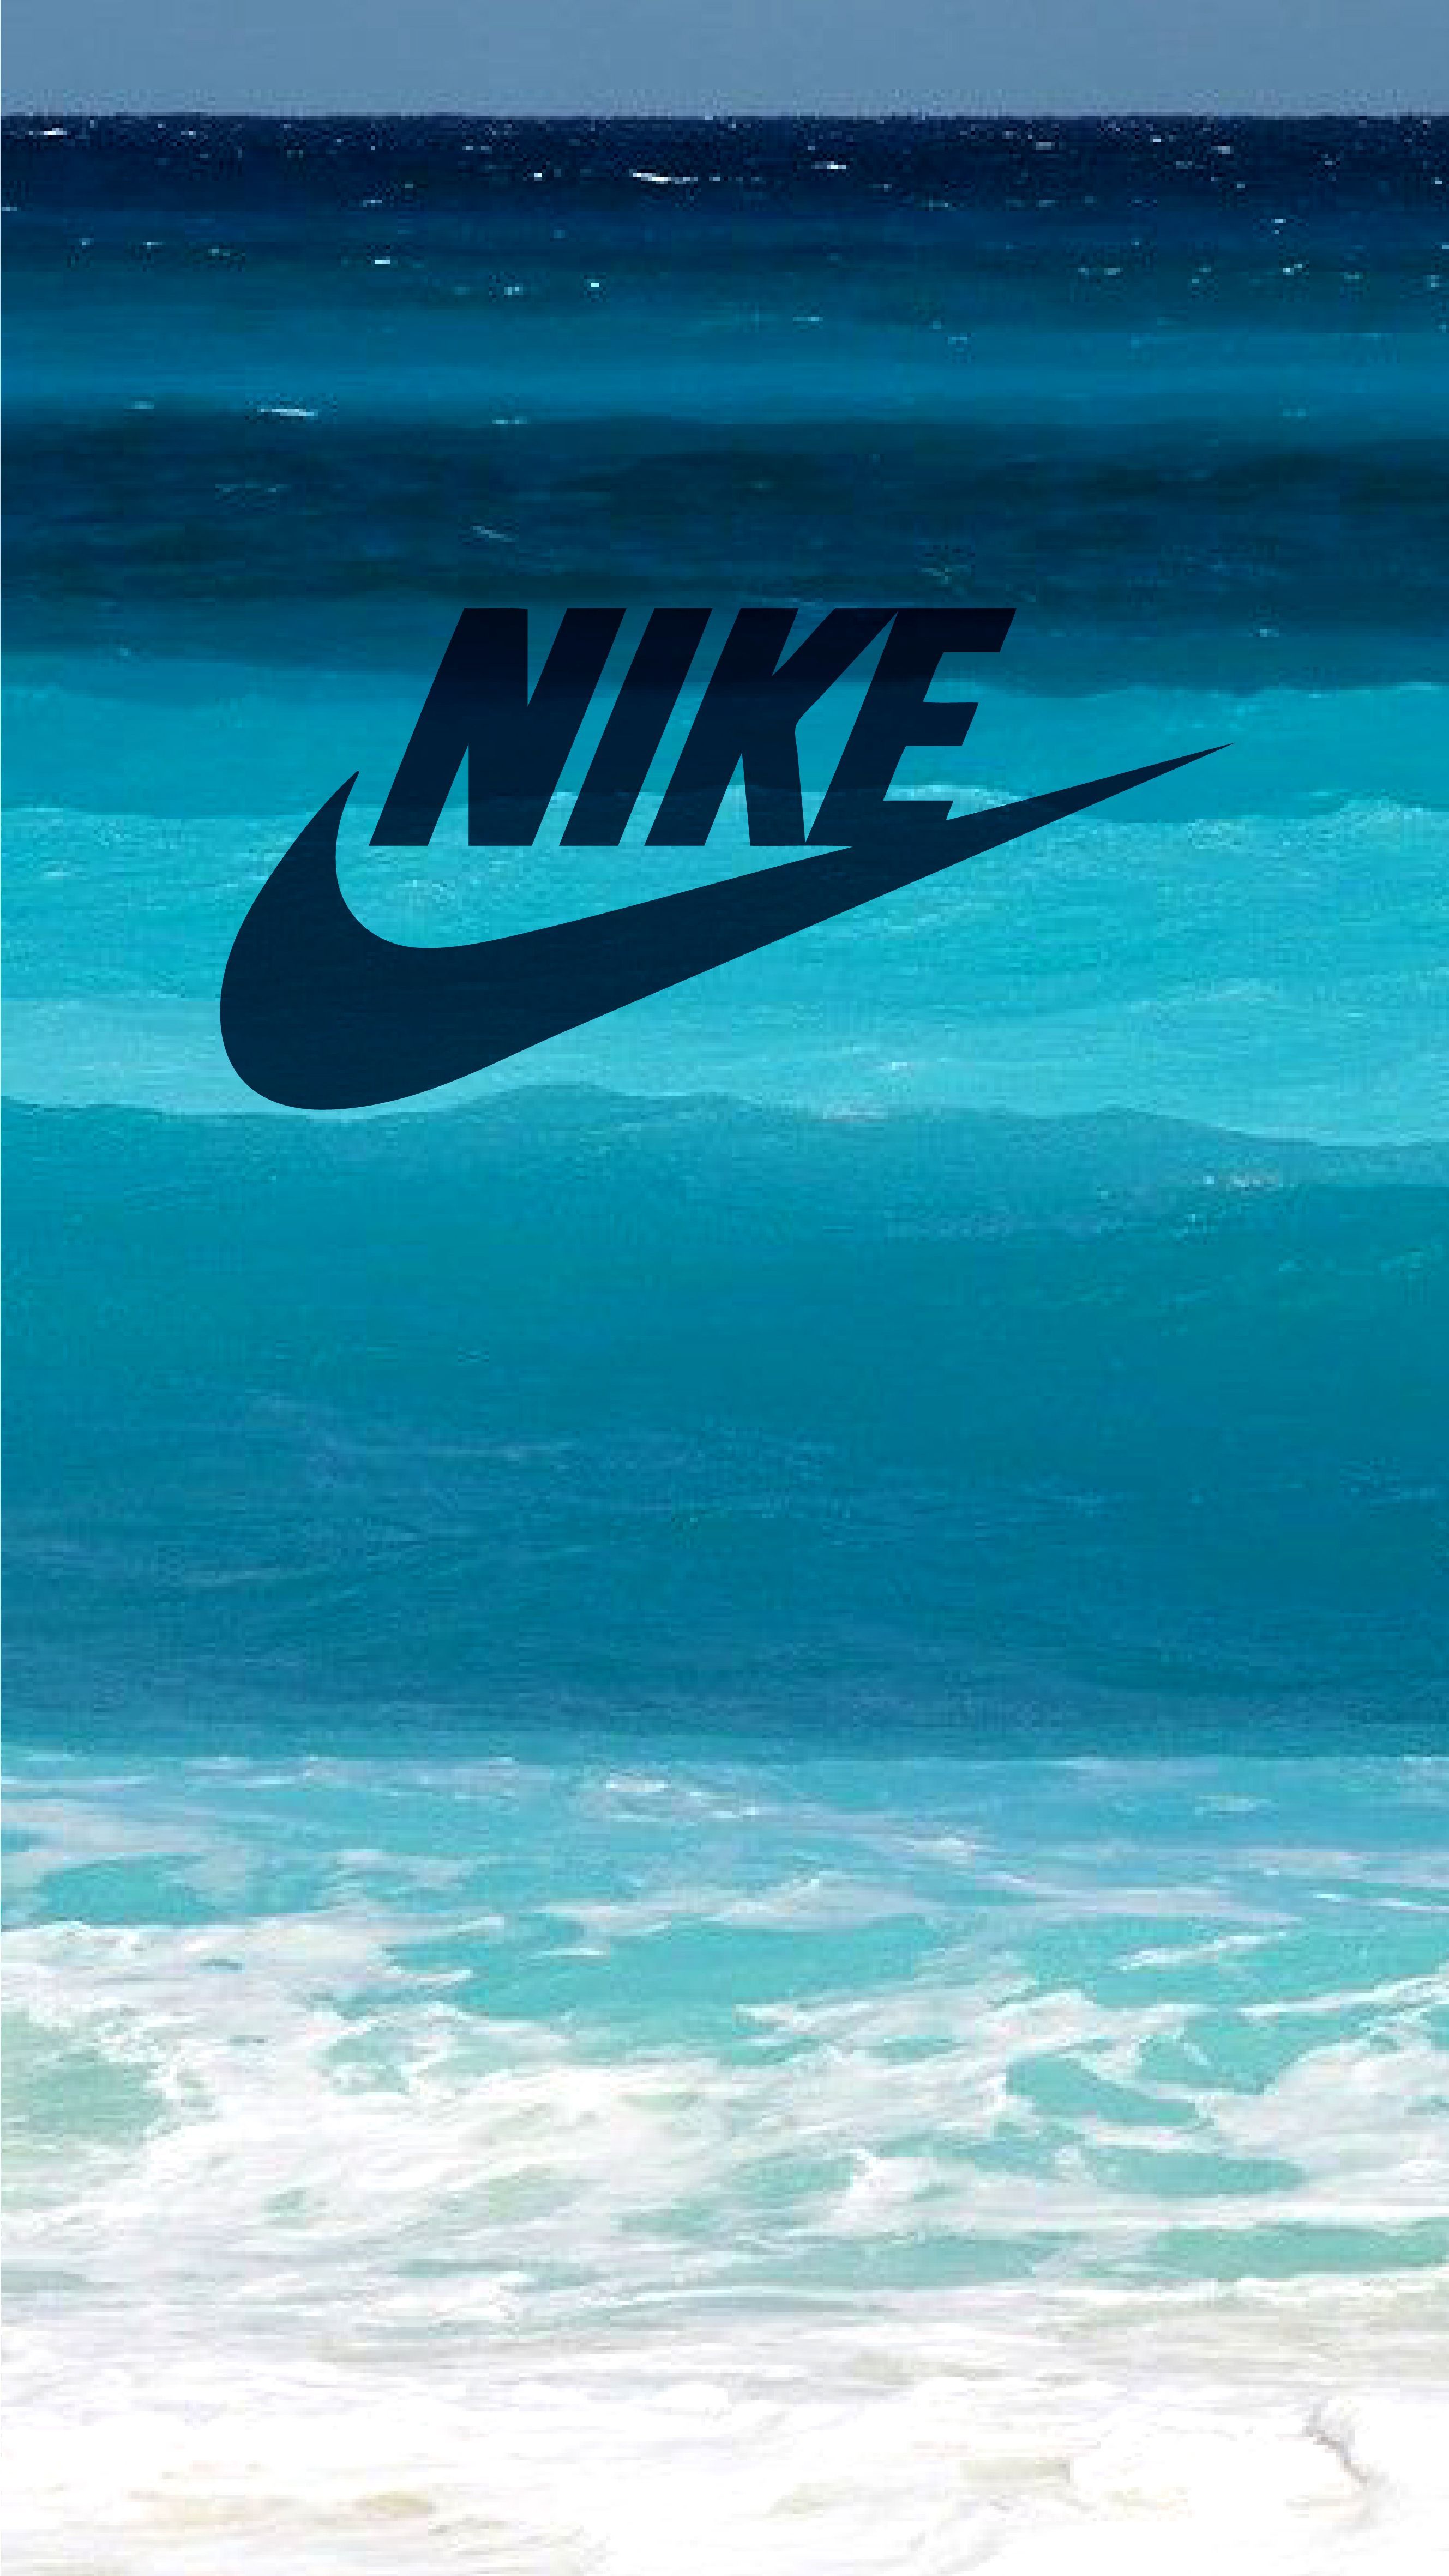 image By G D R Modern Gallery On Sport. Nike Wallpaper. Cool nike wallpaper, Nike wallpaper, Nike